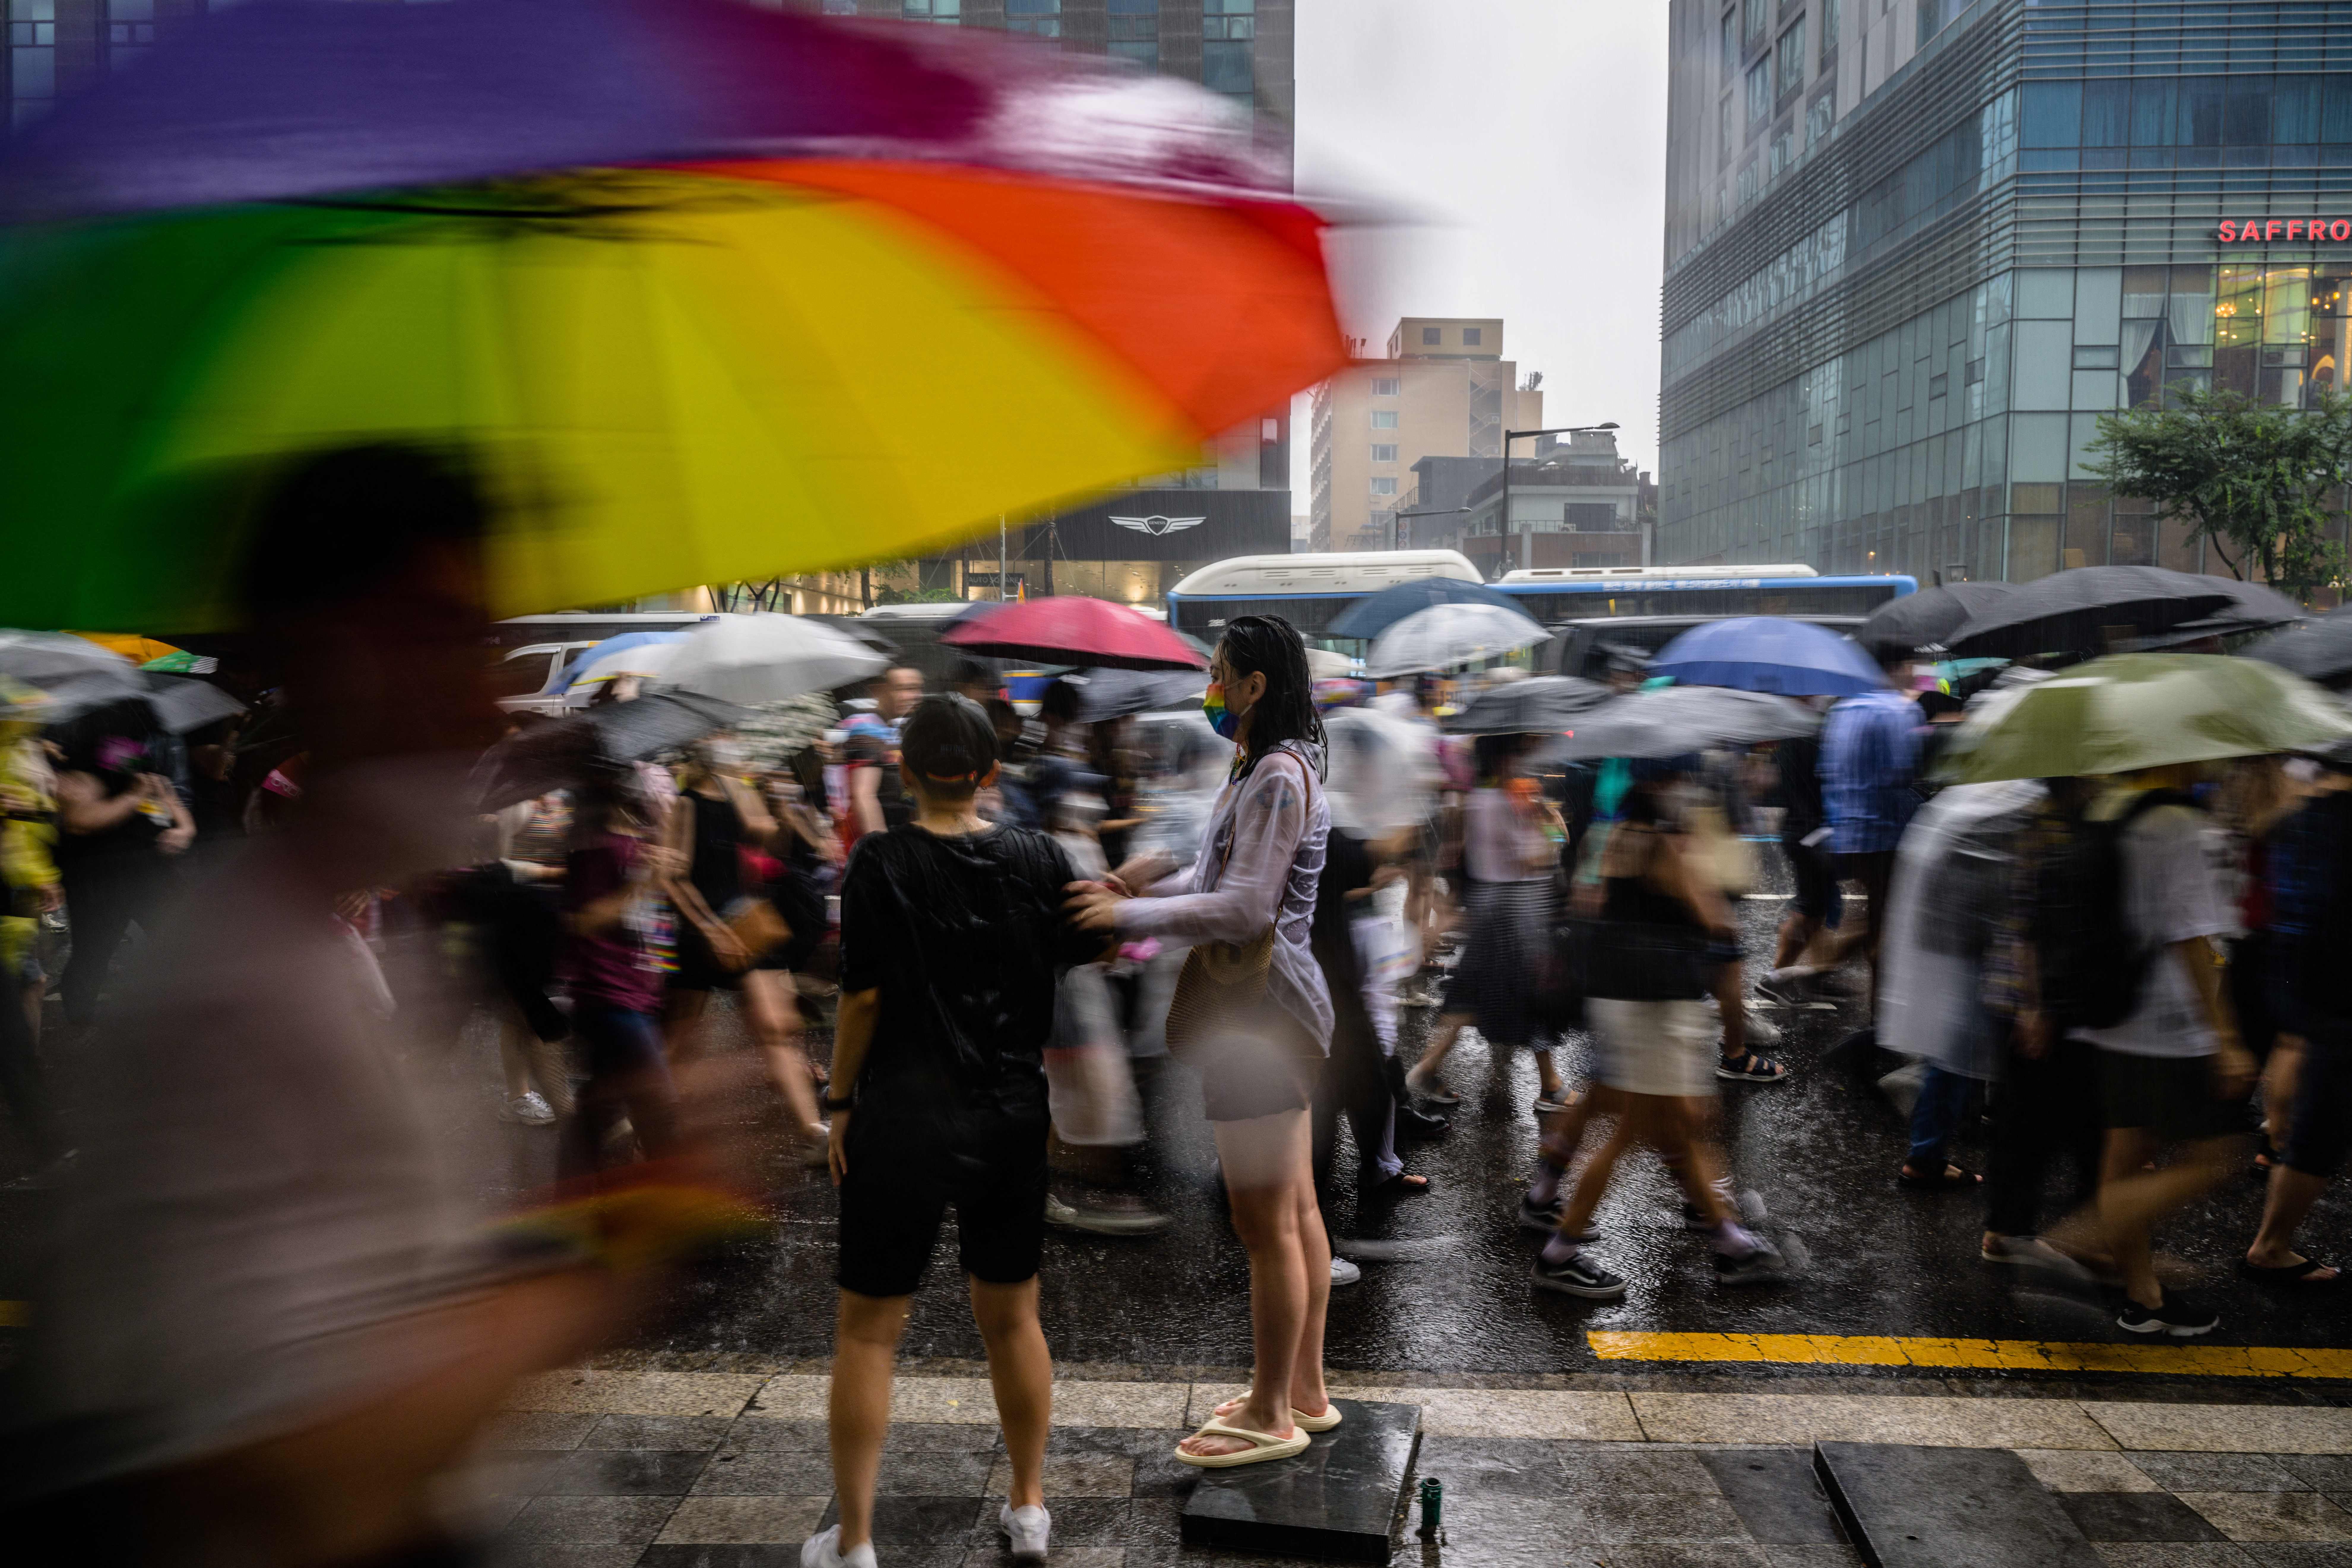 File: Participants take part in a parade as it rains heavily during a Pride event in support of LGBTQ rights as part of the Seoul Queer Culture Festival in Seoul